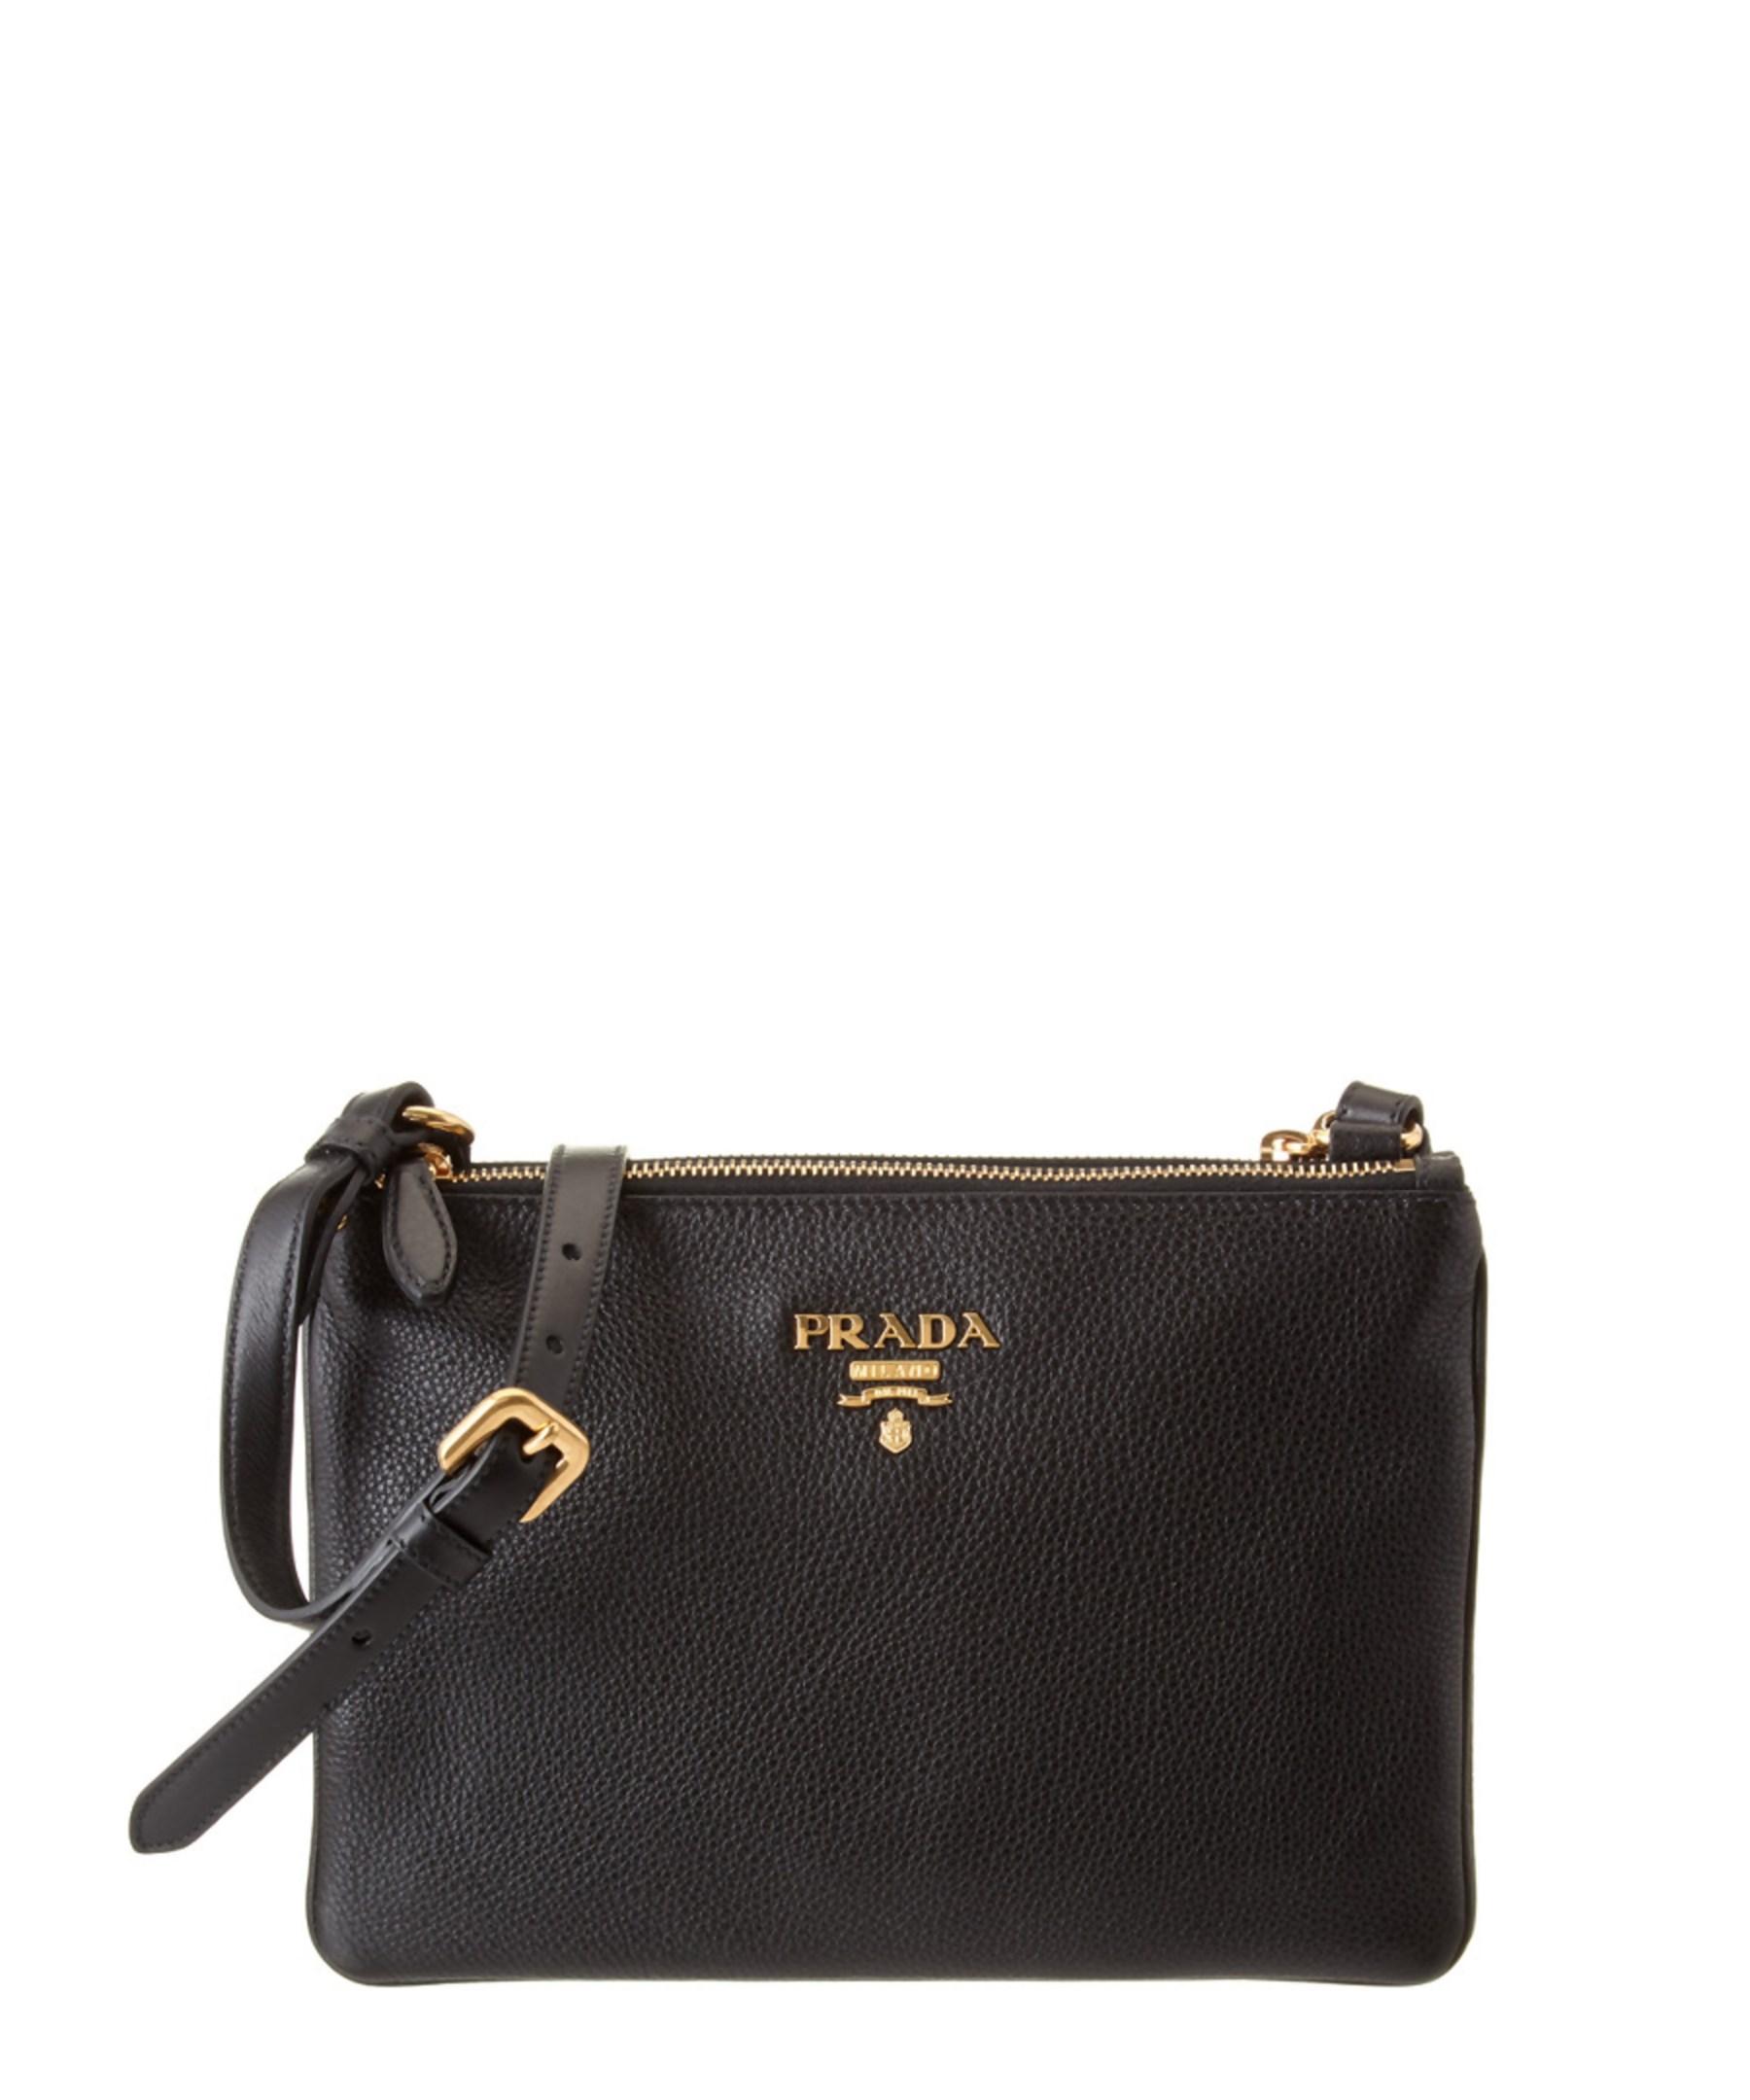 Prada Calf Leather Double Compartment Shoulder Bag in Black | Lyst